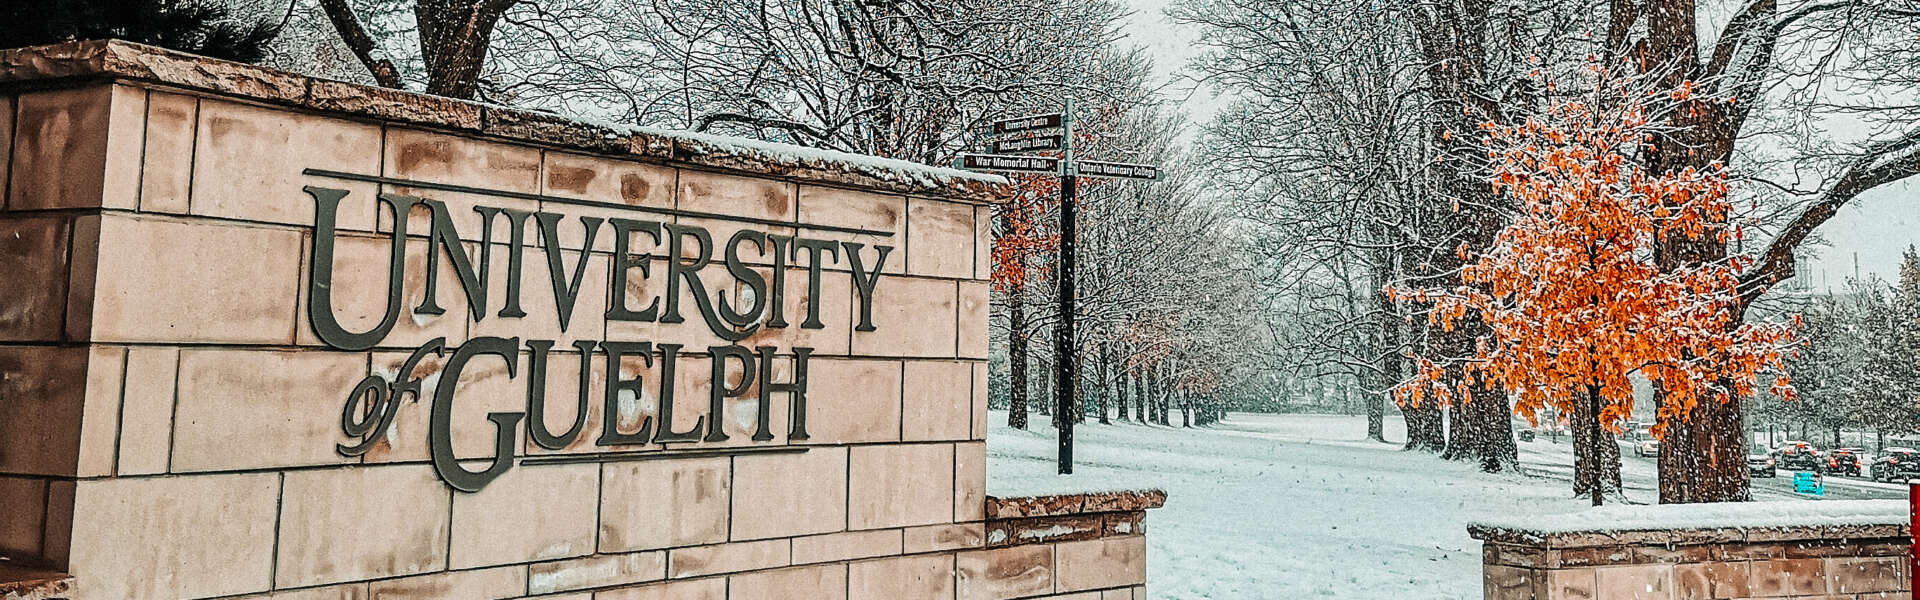 A beige stone sign that says "University of Guelph" in the forefront. Behind it is a snowy, treed field.